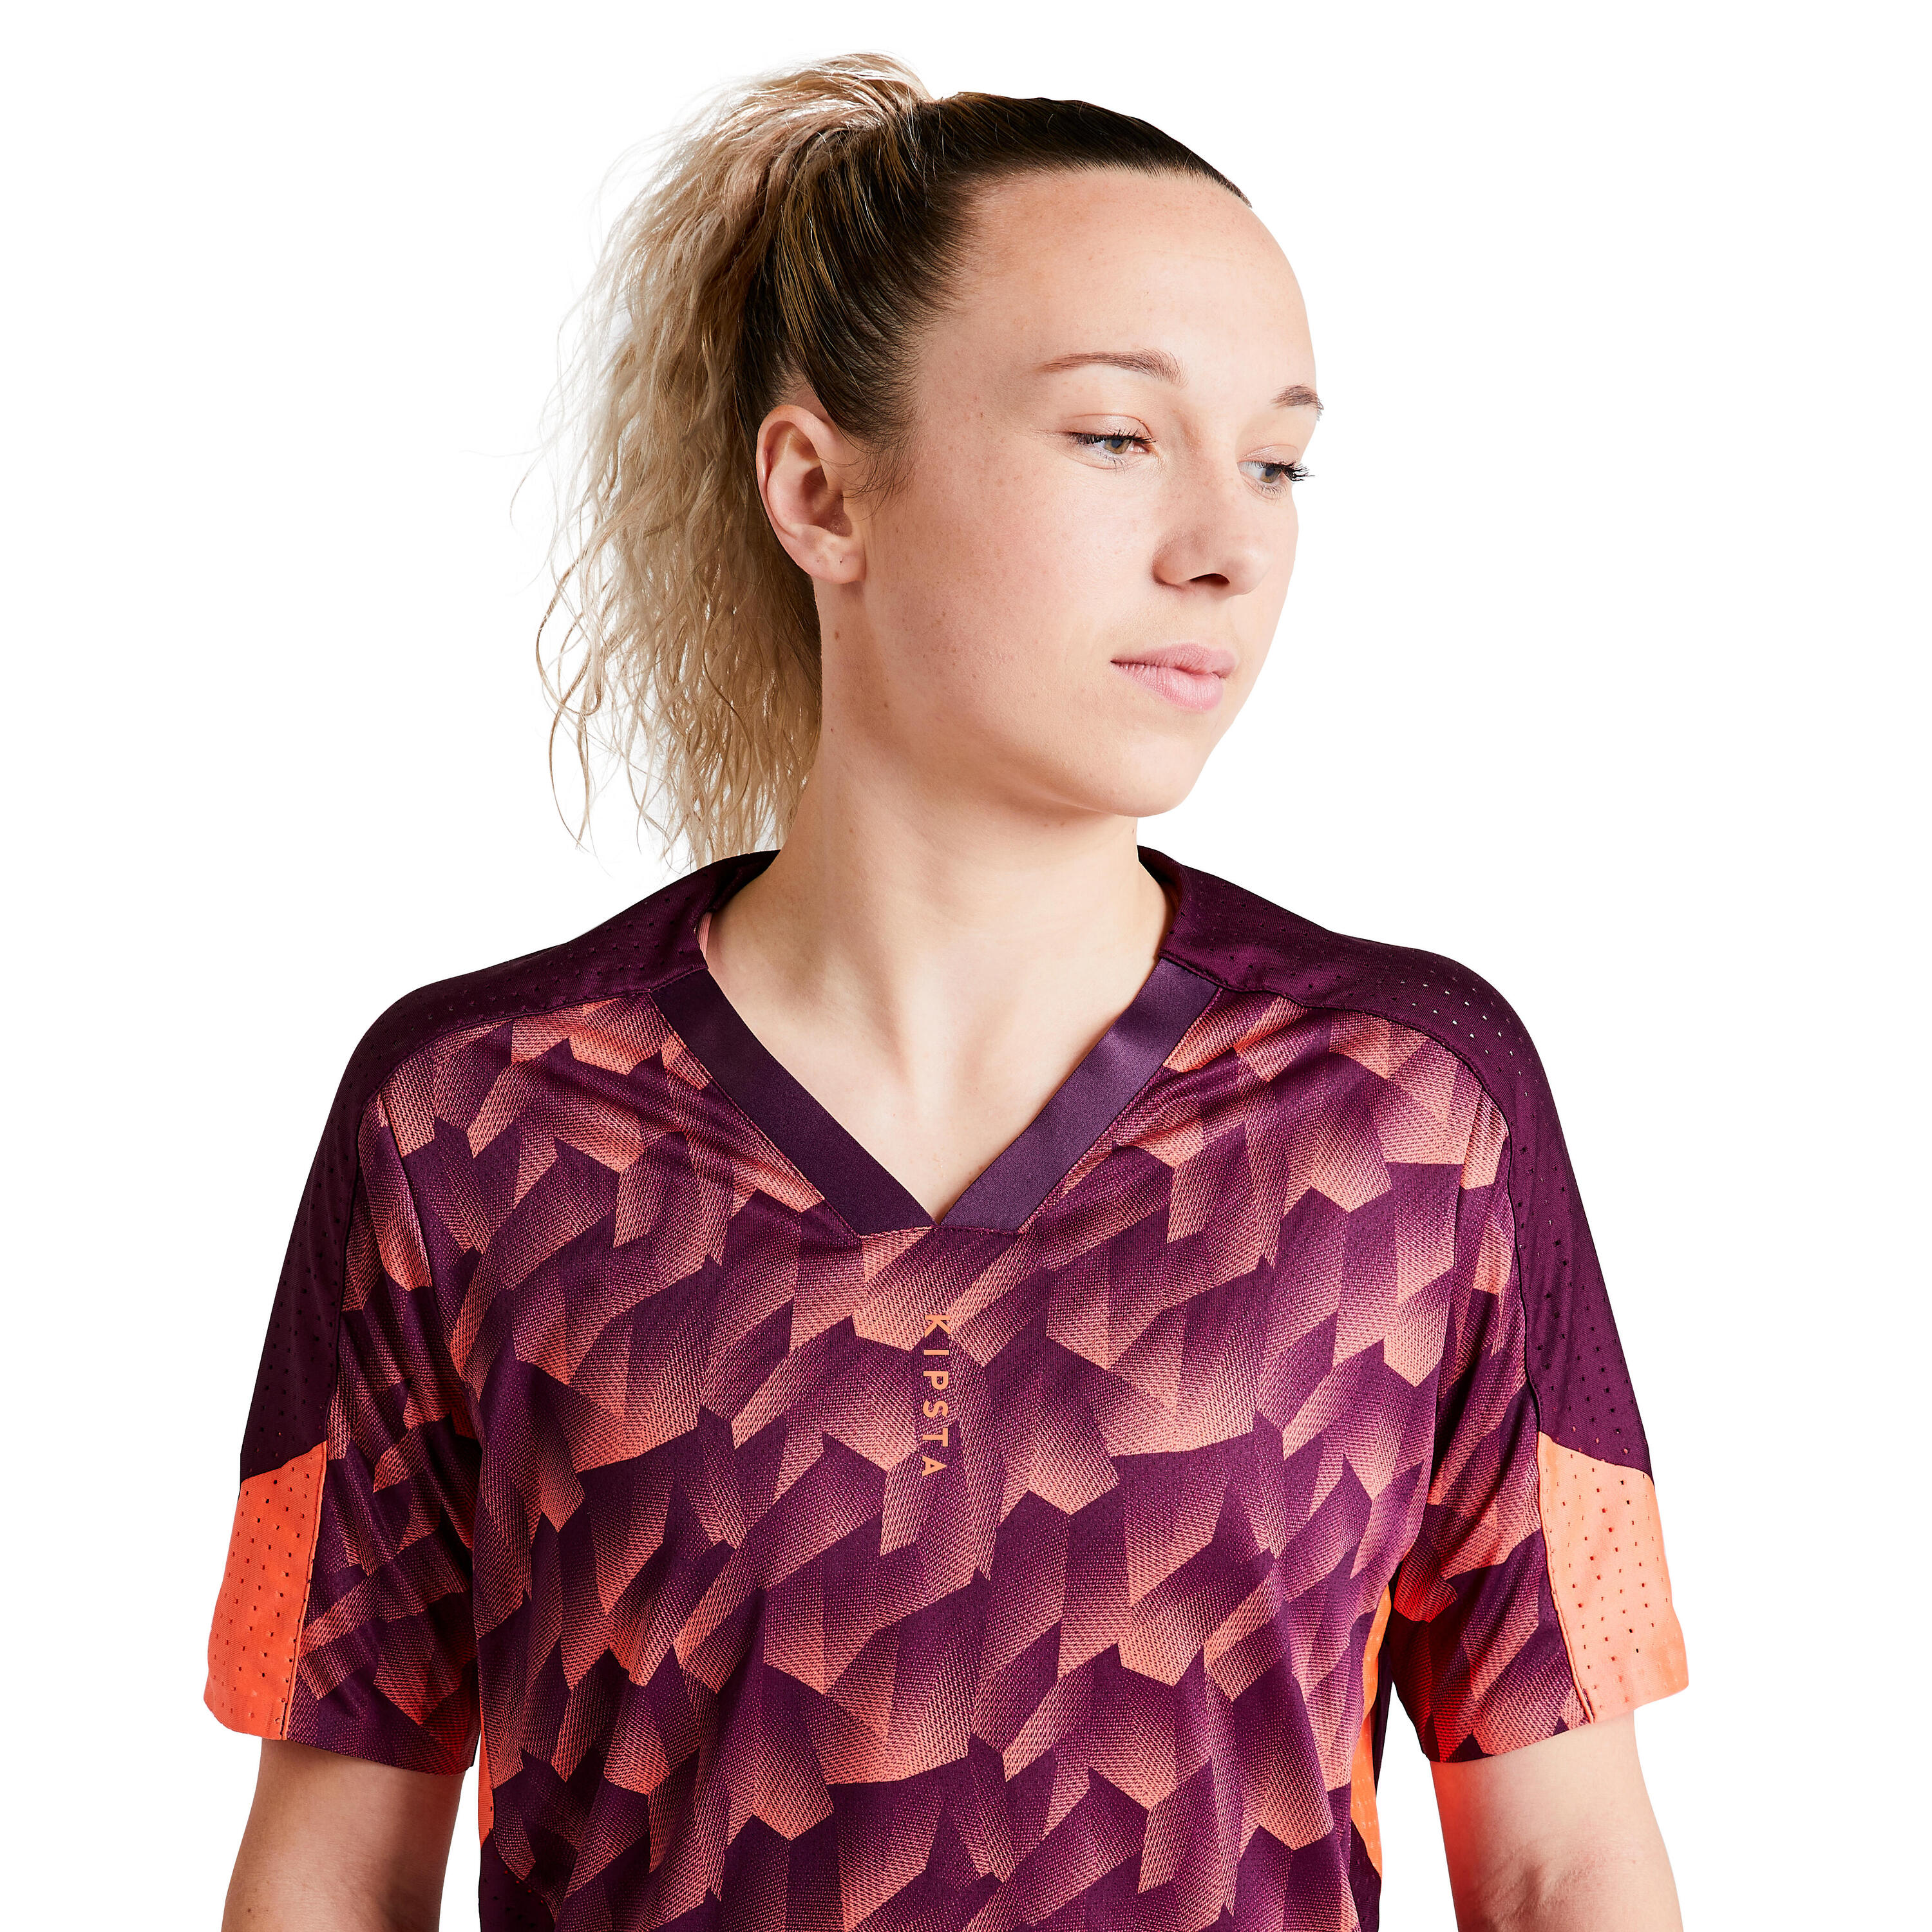 Women's Football Jersey F900 - Coral 10/31